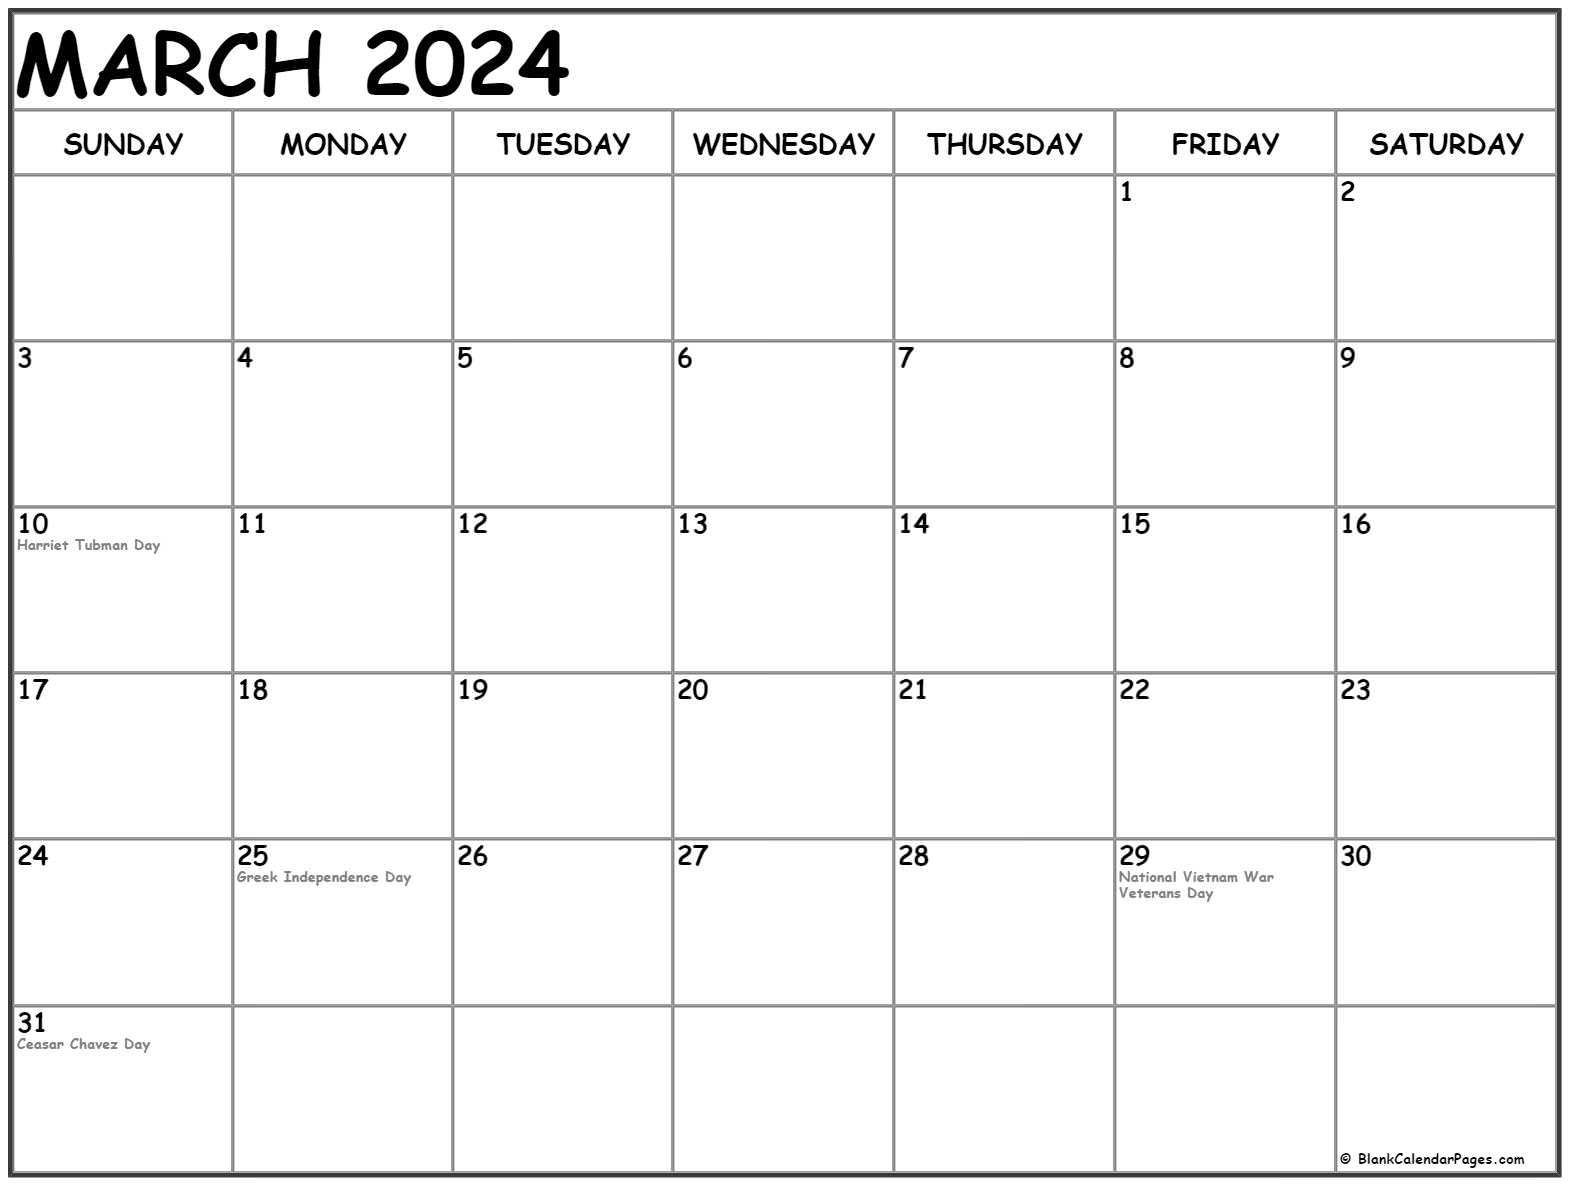 march-2023-calendar-free-blank-printable-with-holidays